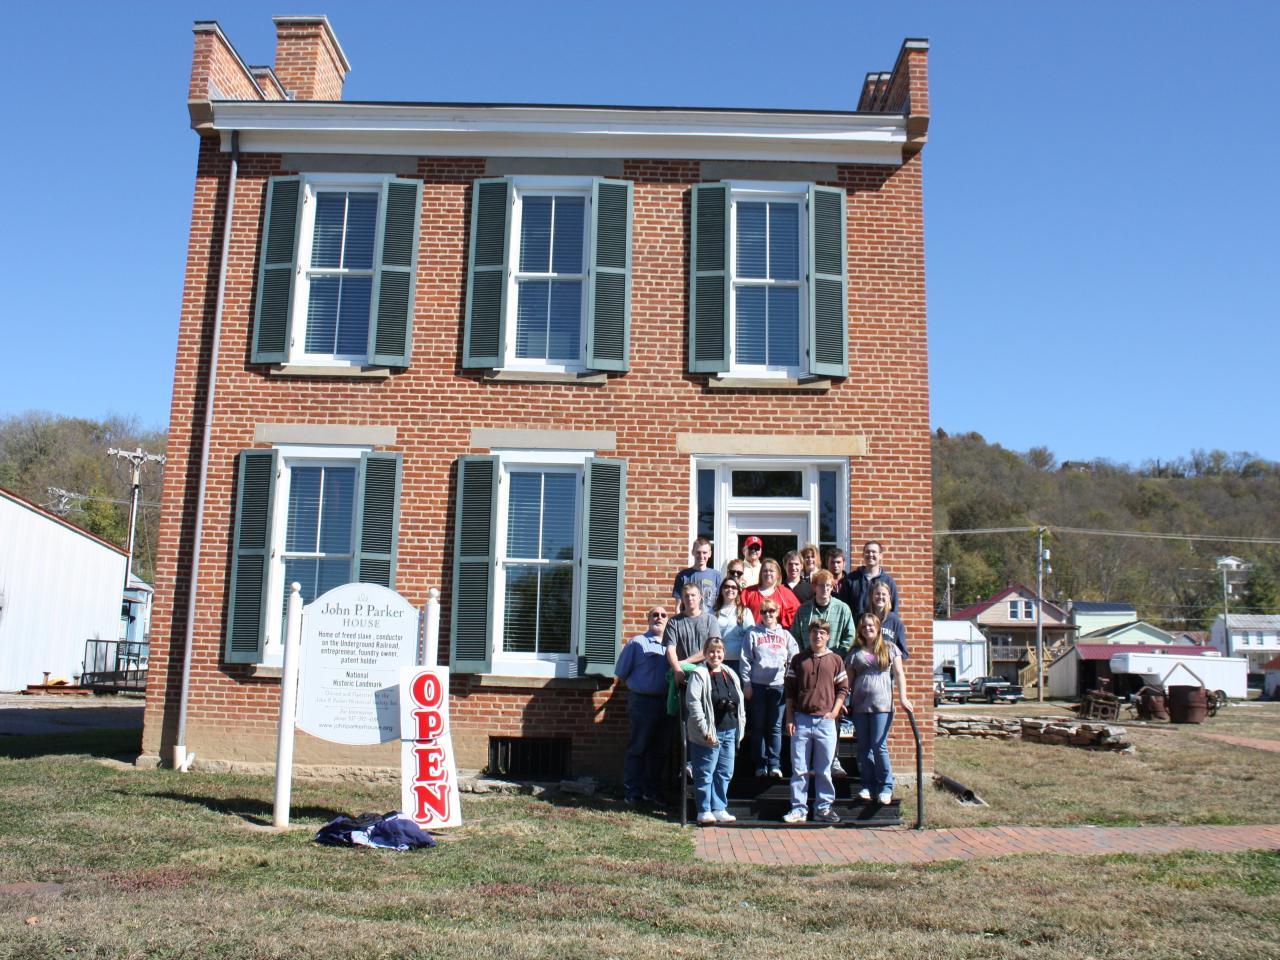 An Ohio State Lima honors group visits the John Parker House in Ripley, Ohio